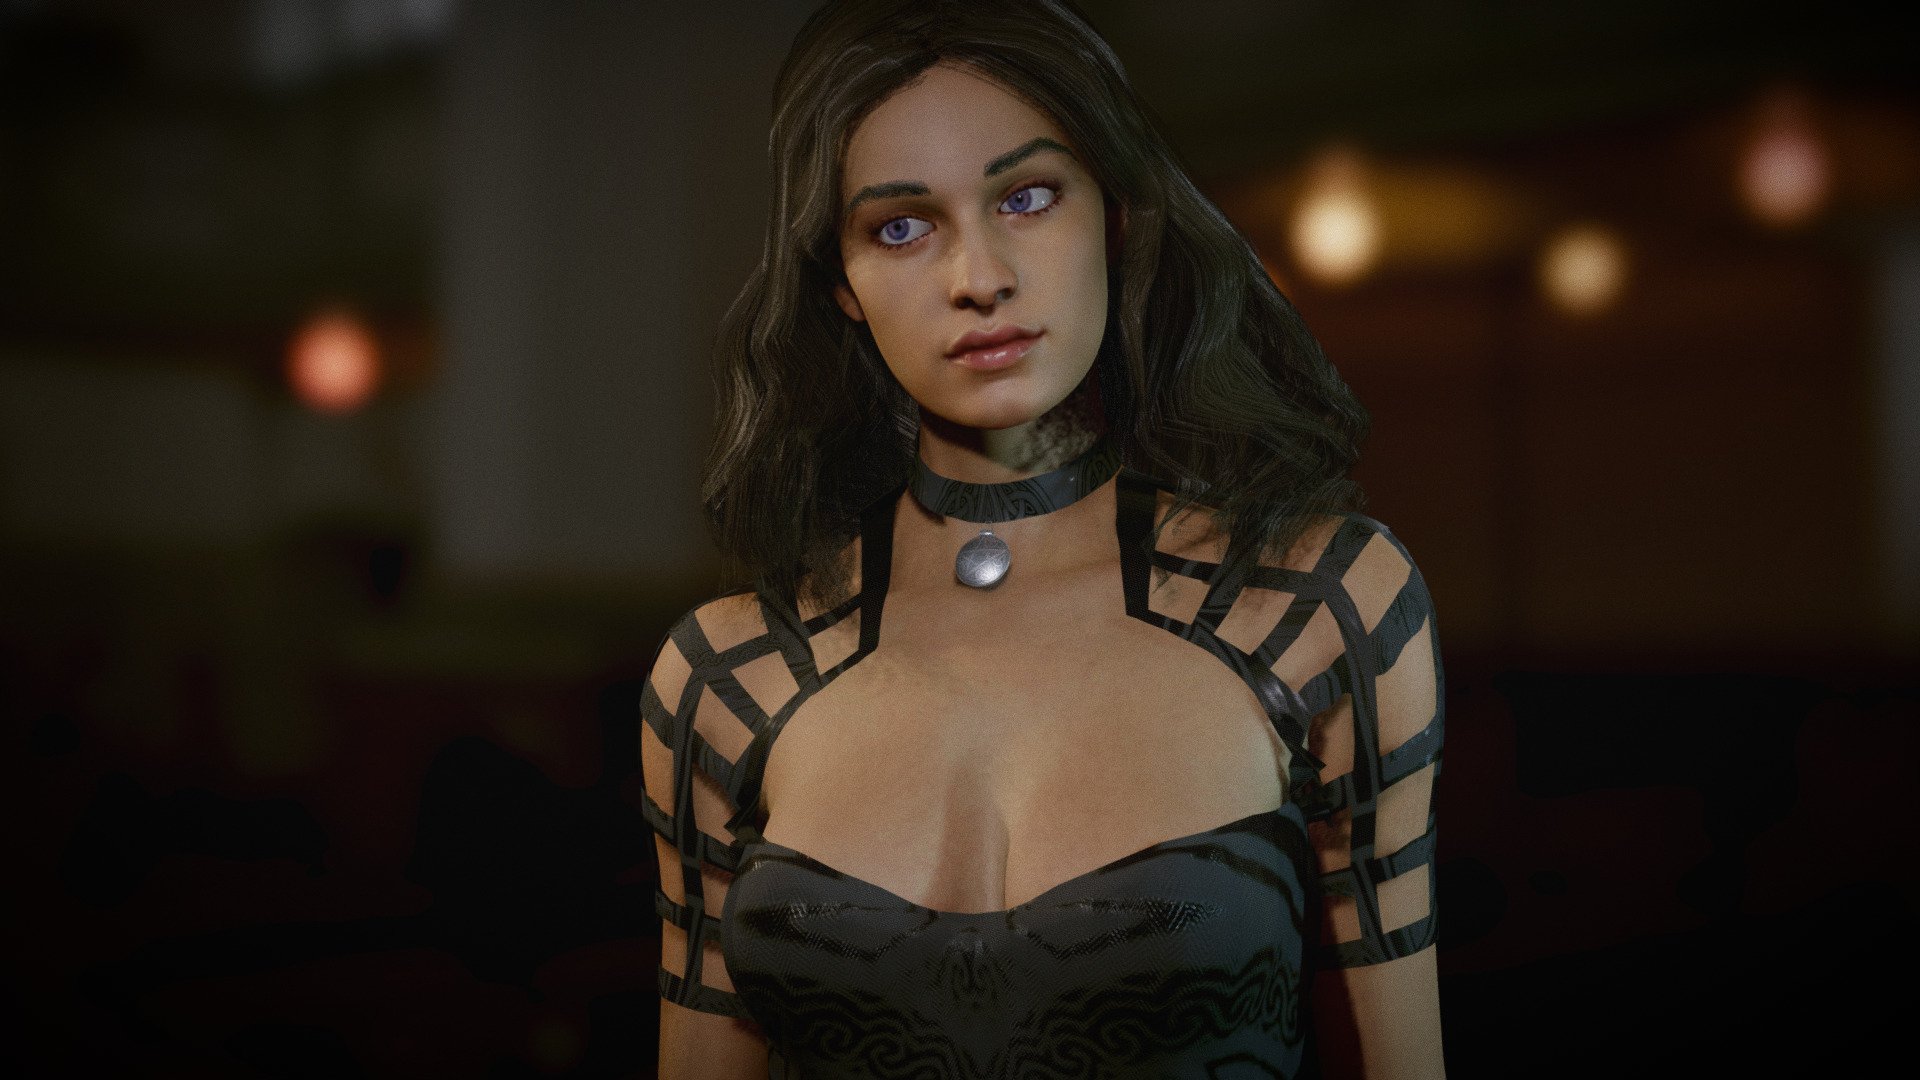 Anya as Yennefer - Sorceress Witch fanart, Female  Girl with dress , includes. Model in Blender file. Fully rigged. SSS subsurface scattering. mixamo bone names for animation. No FBX or OBJ format, only Blend file 3d model